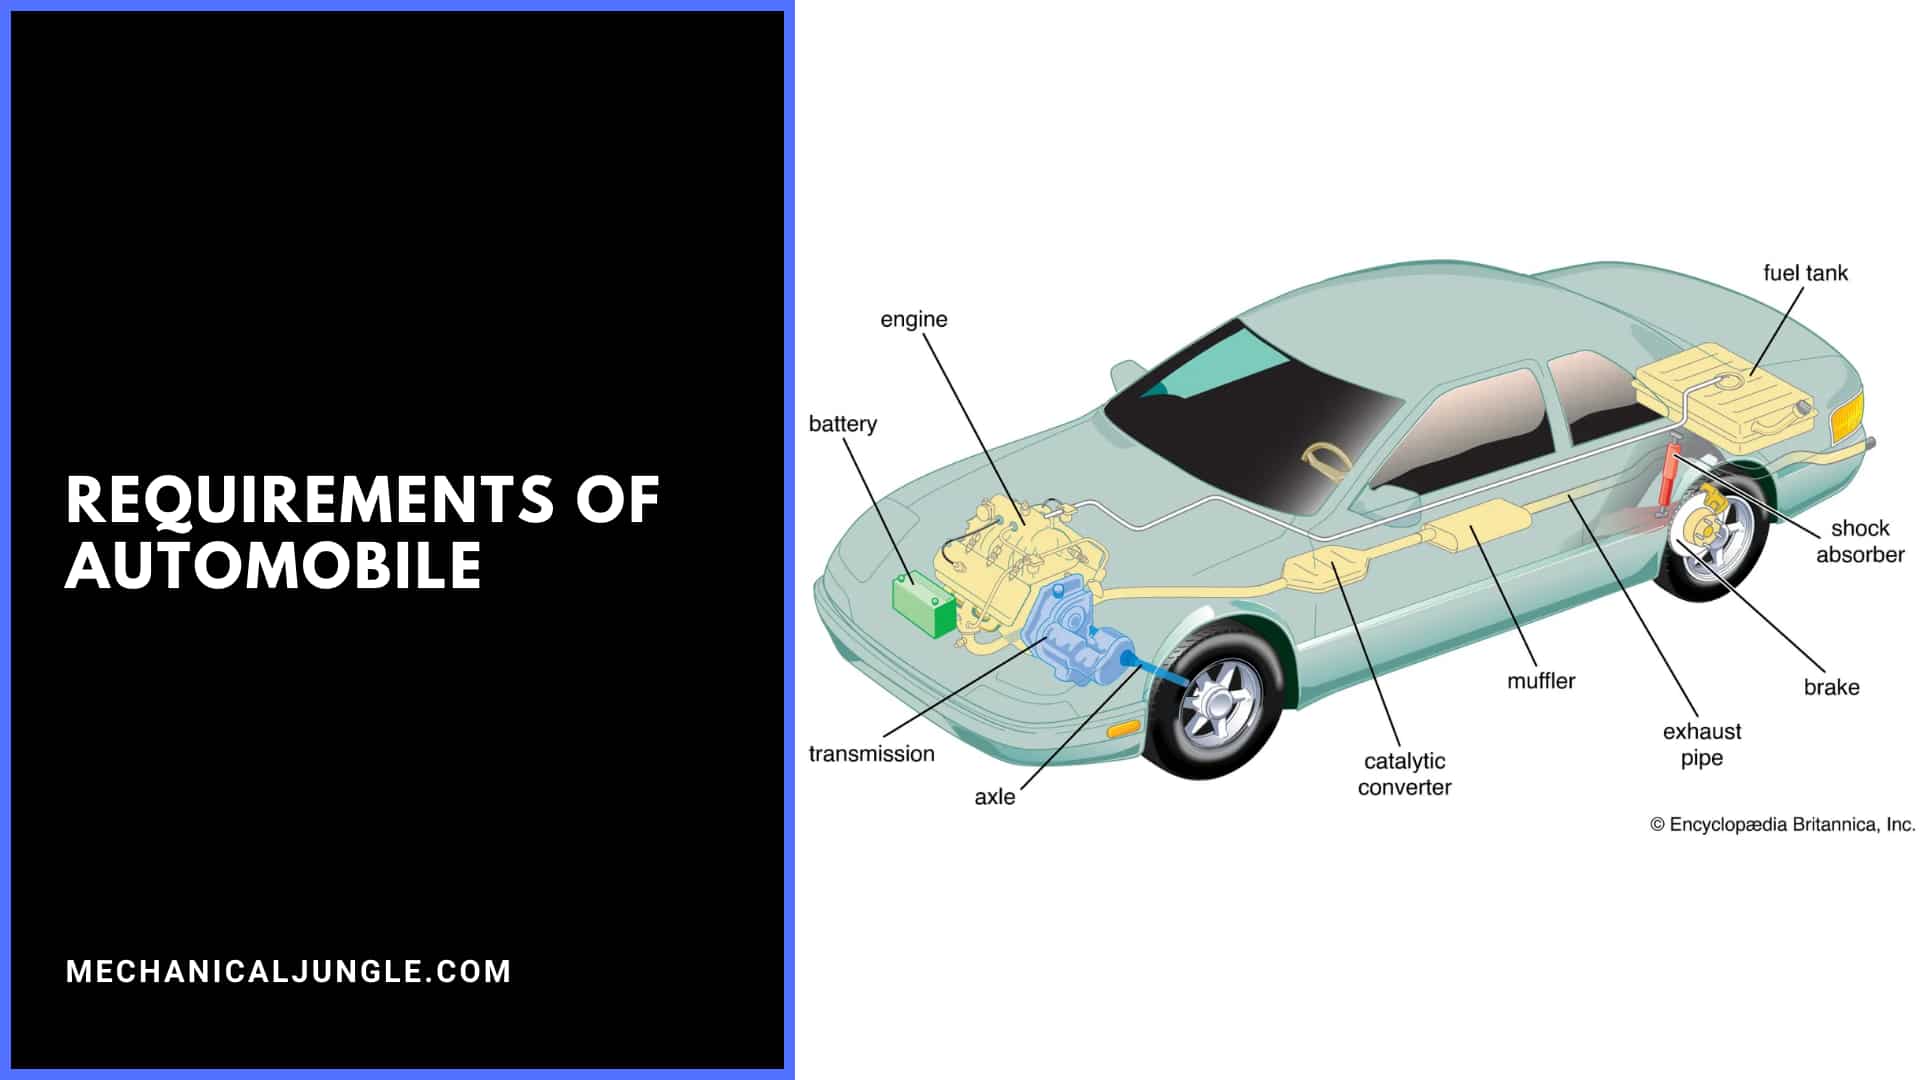 Requirements of Automobile